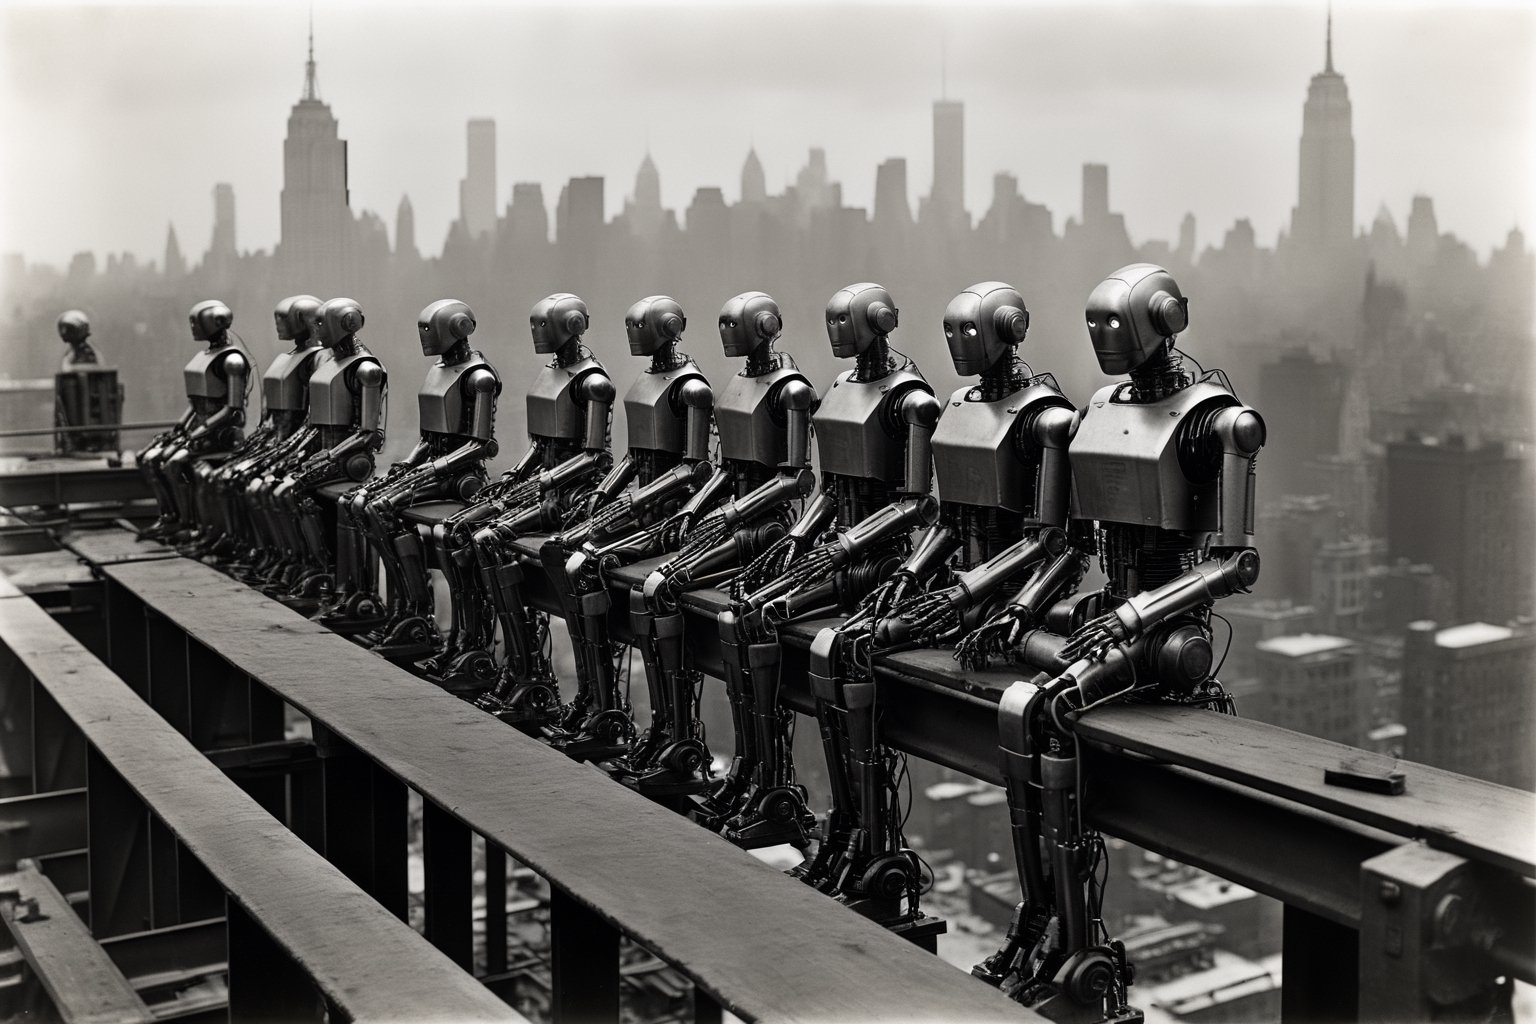 B & W photograph of a group of robots constrution sitting on a steel beam high above the ground, during lunch break, during construction of the RCA Building in Manhattan, art by by Lewis Hine, September 20, 1932